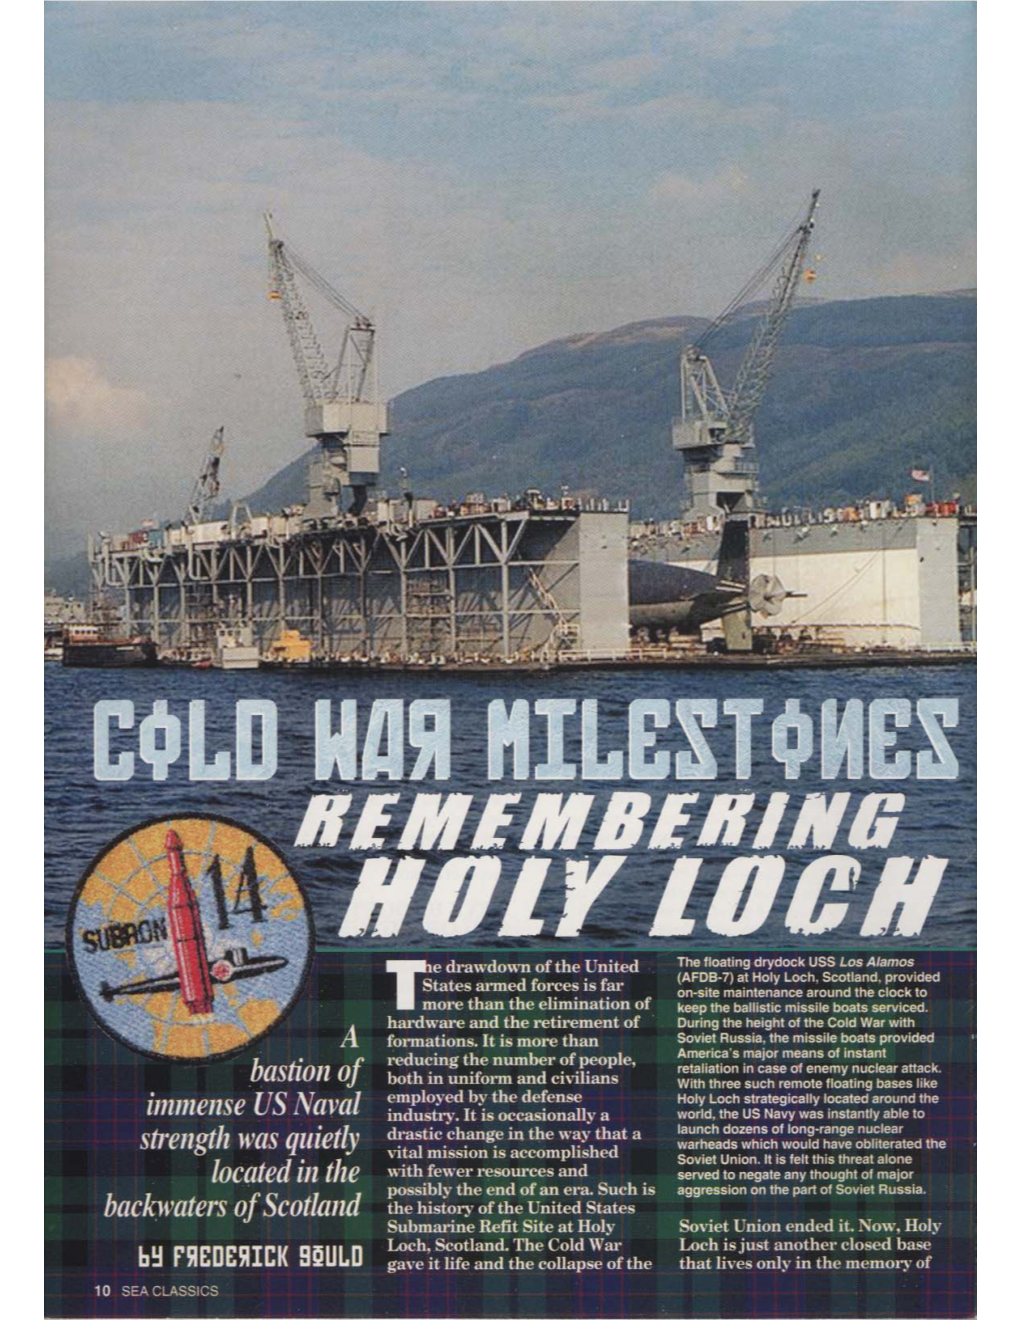 Sea Classics Article on Holy Loch